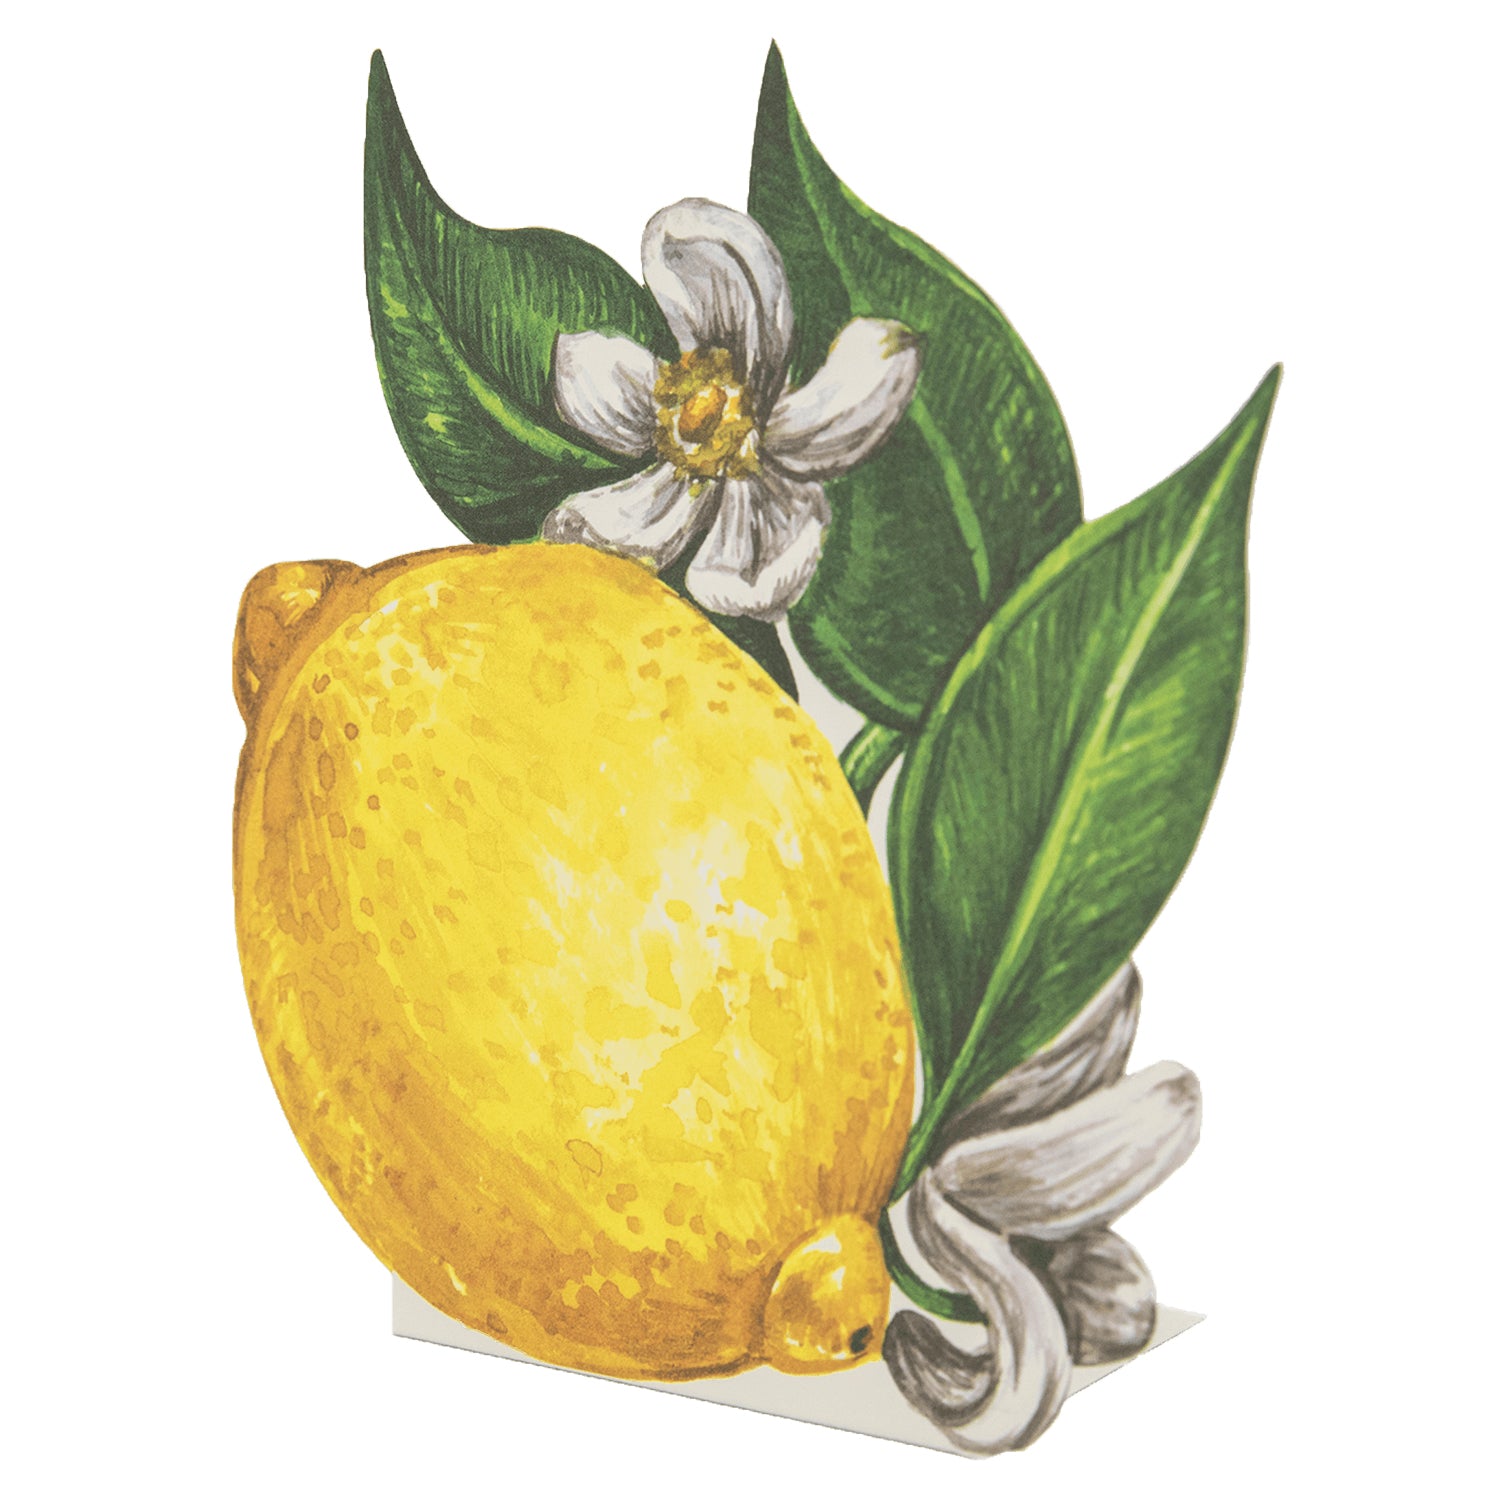 An illustration of a Lemon Place Card with leaves and flowers, perfect as a spring place card from Hester &amp; Cook.